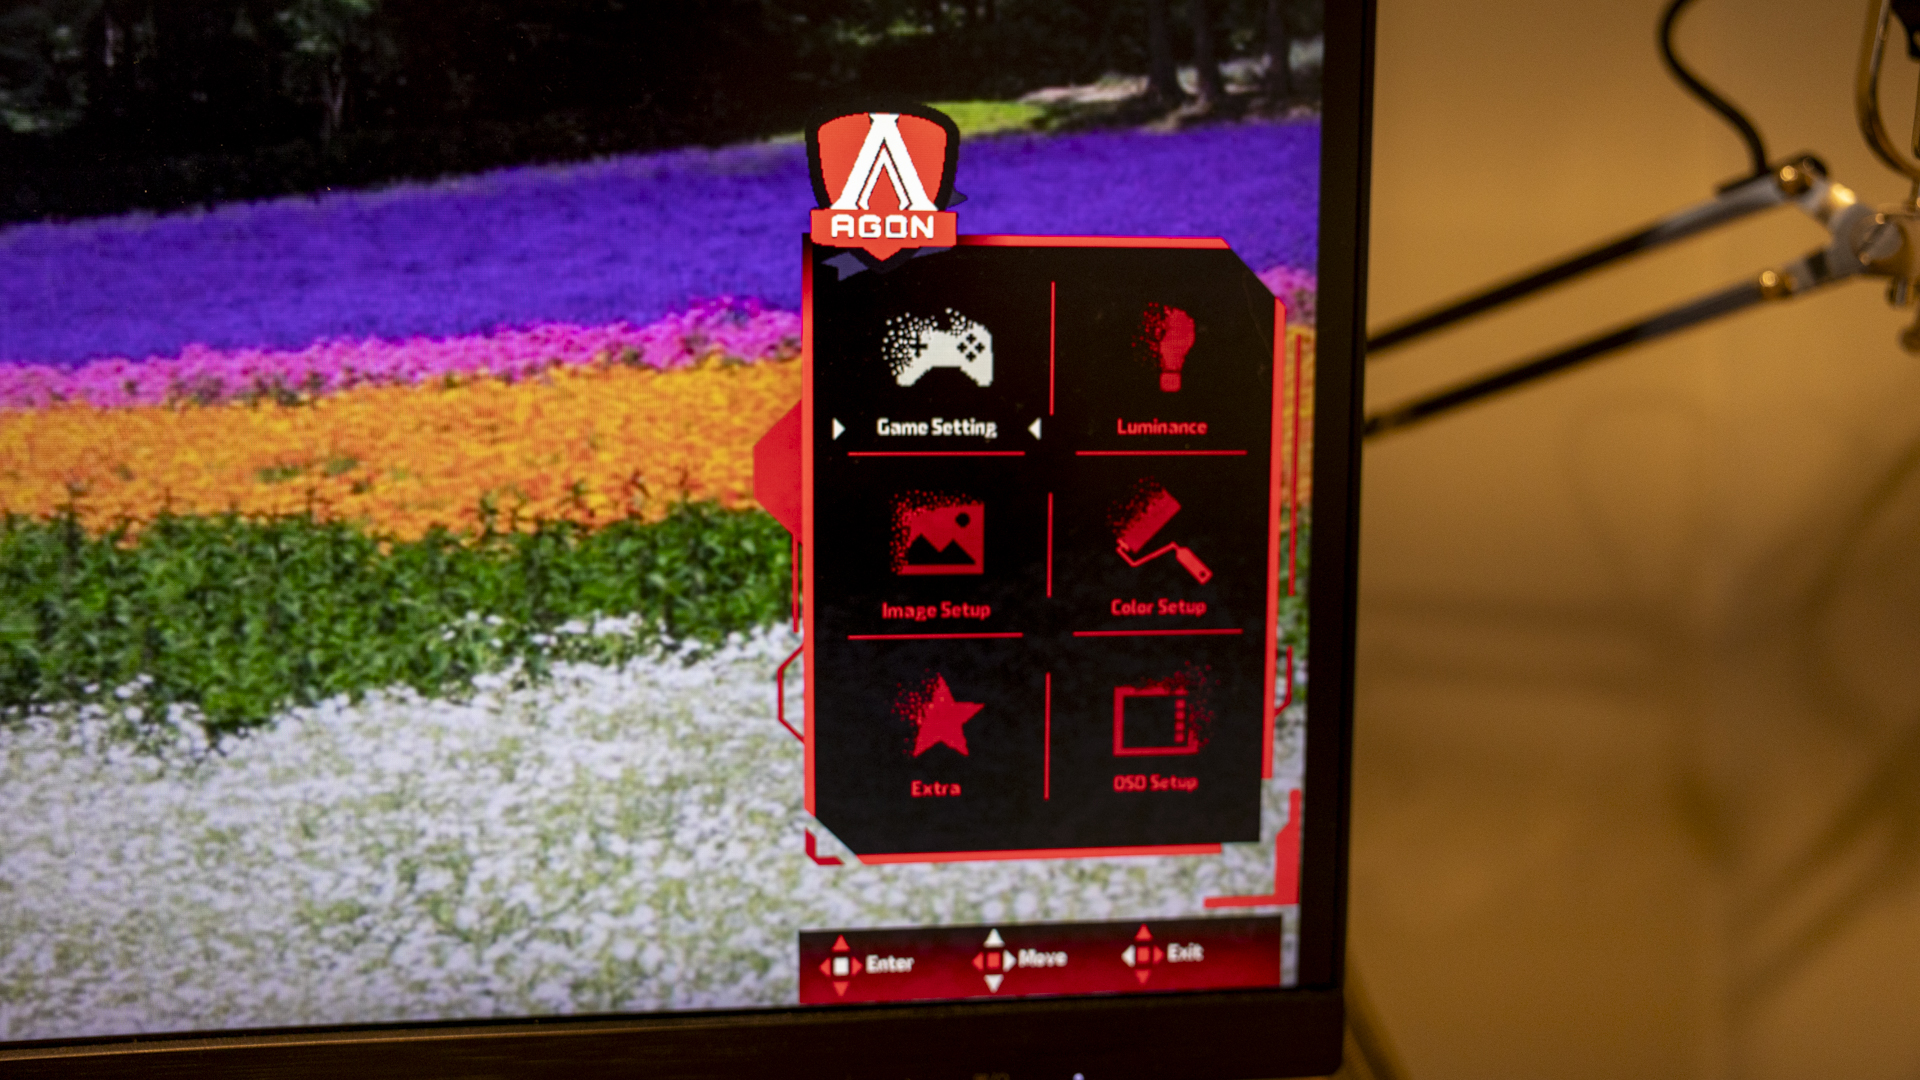 The menu of the The AOC Agon AG493UCX2 monitor